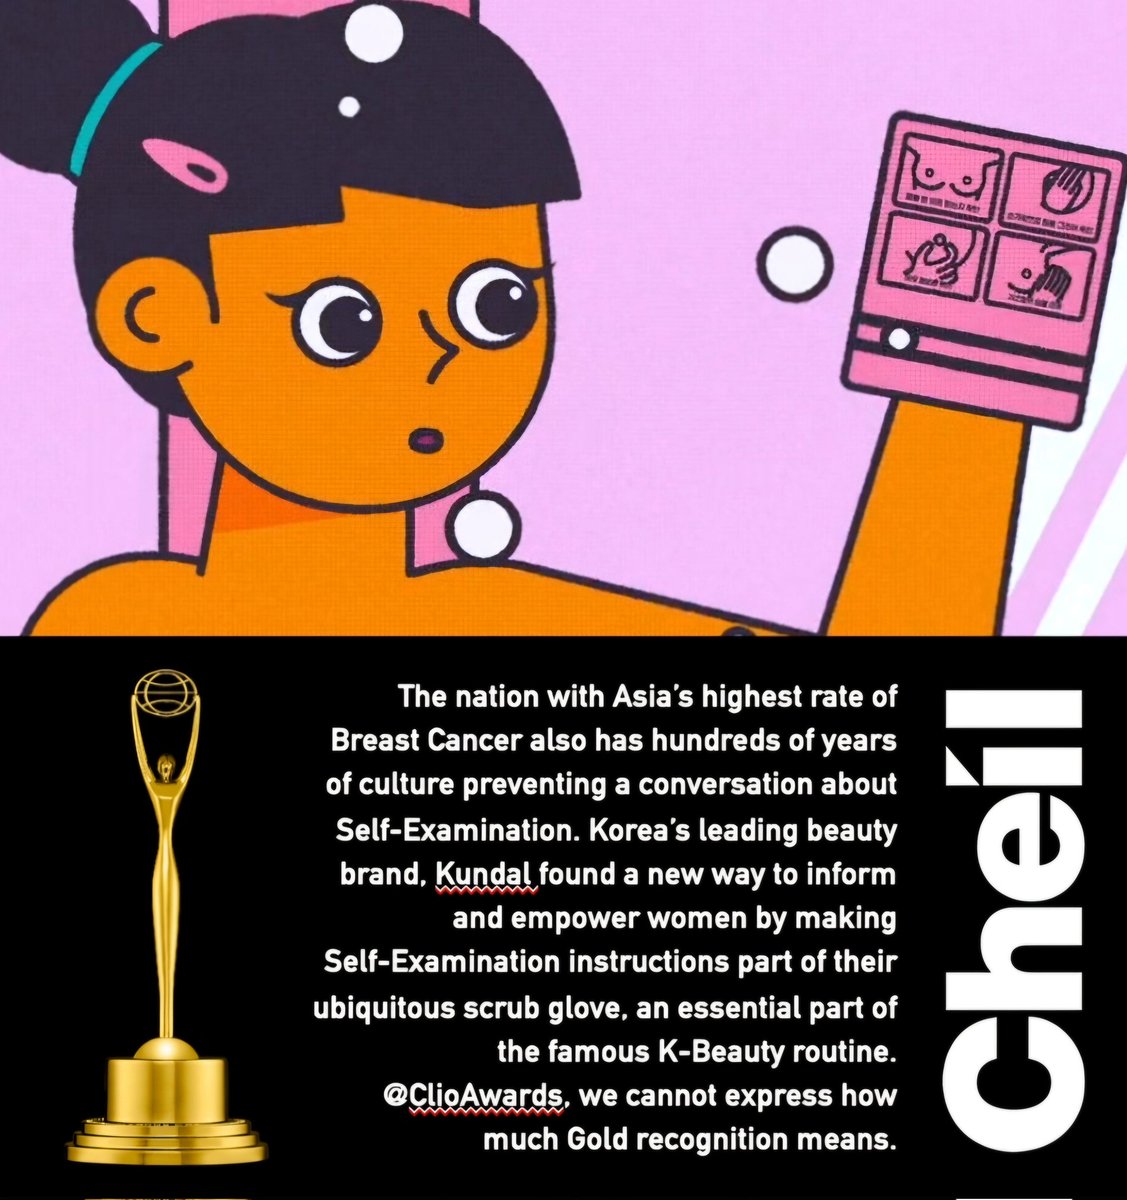 @Cheil_Worldwide x @Kundal set out to beat breast cancer in #Korea Winning #Gold @ClioAwards Awards along the way is a real honour. Massive congrats team. And huge thanks @ClioAwards jurors #IdeasThatMove  ##ThisStuffMatters